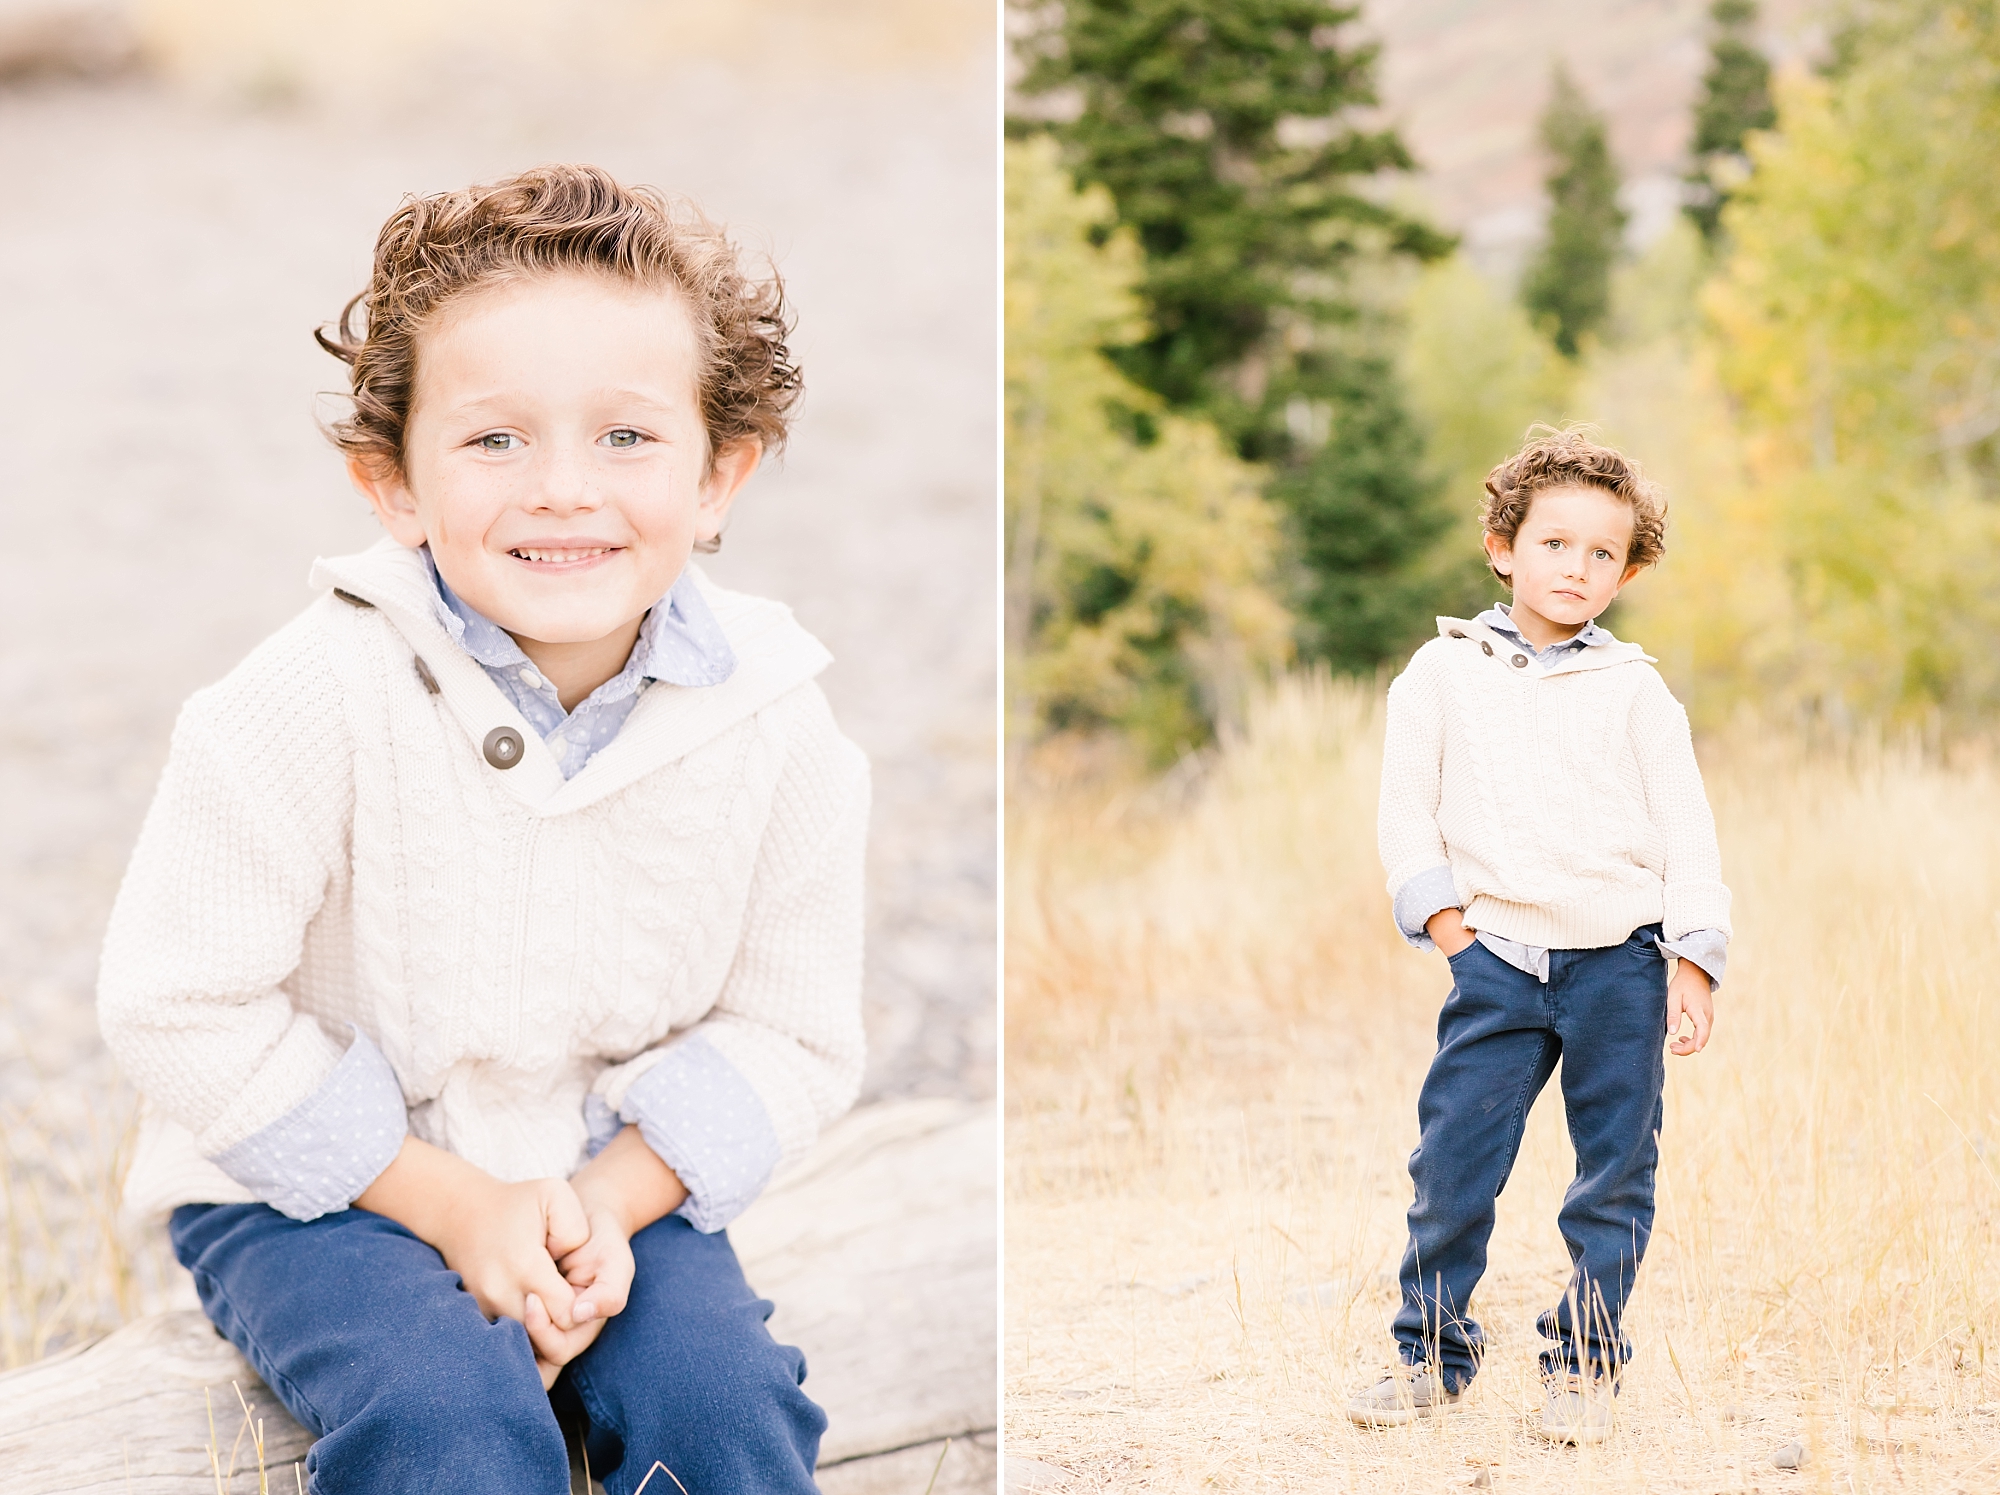 Getting your outfits together for family photos can be so hard! Layering is one of my favorite ways to bring some more texture and visual interest into the photograph.